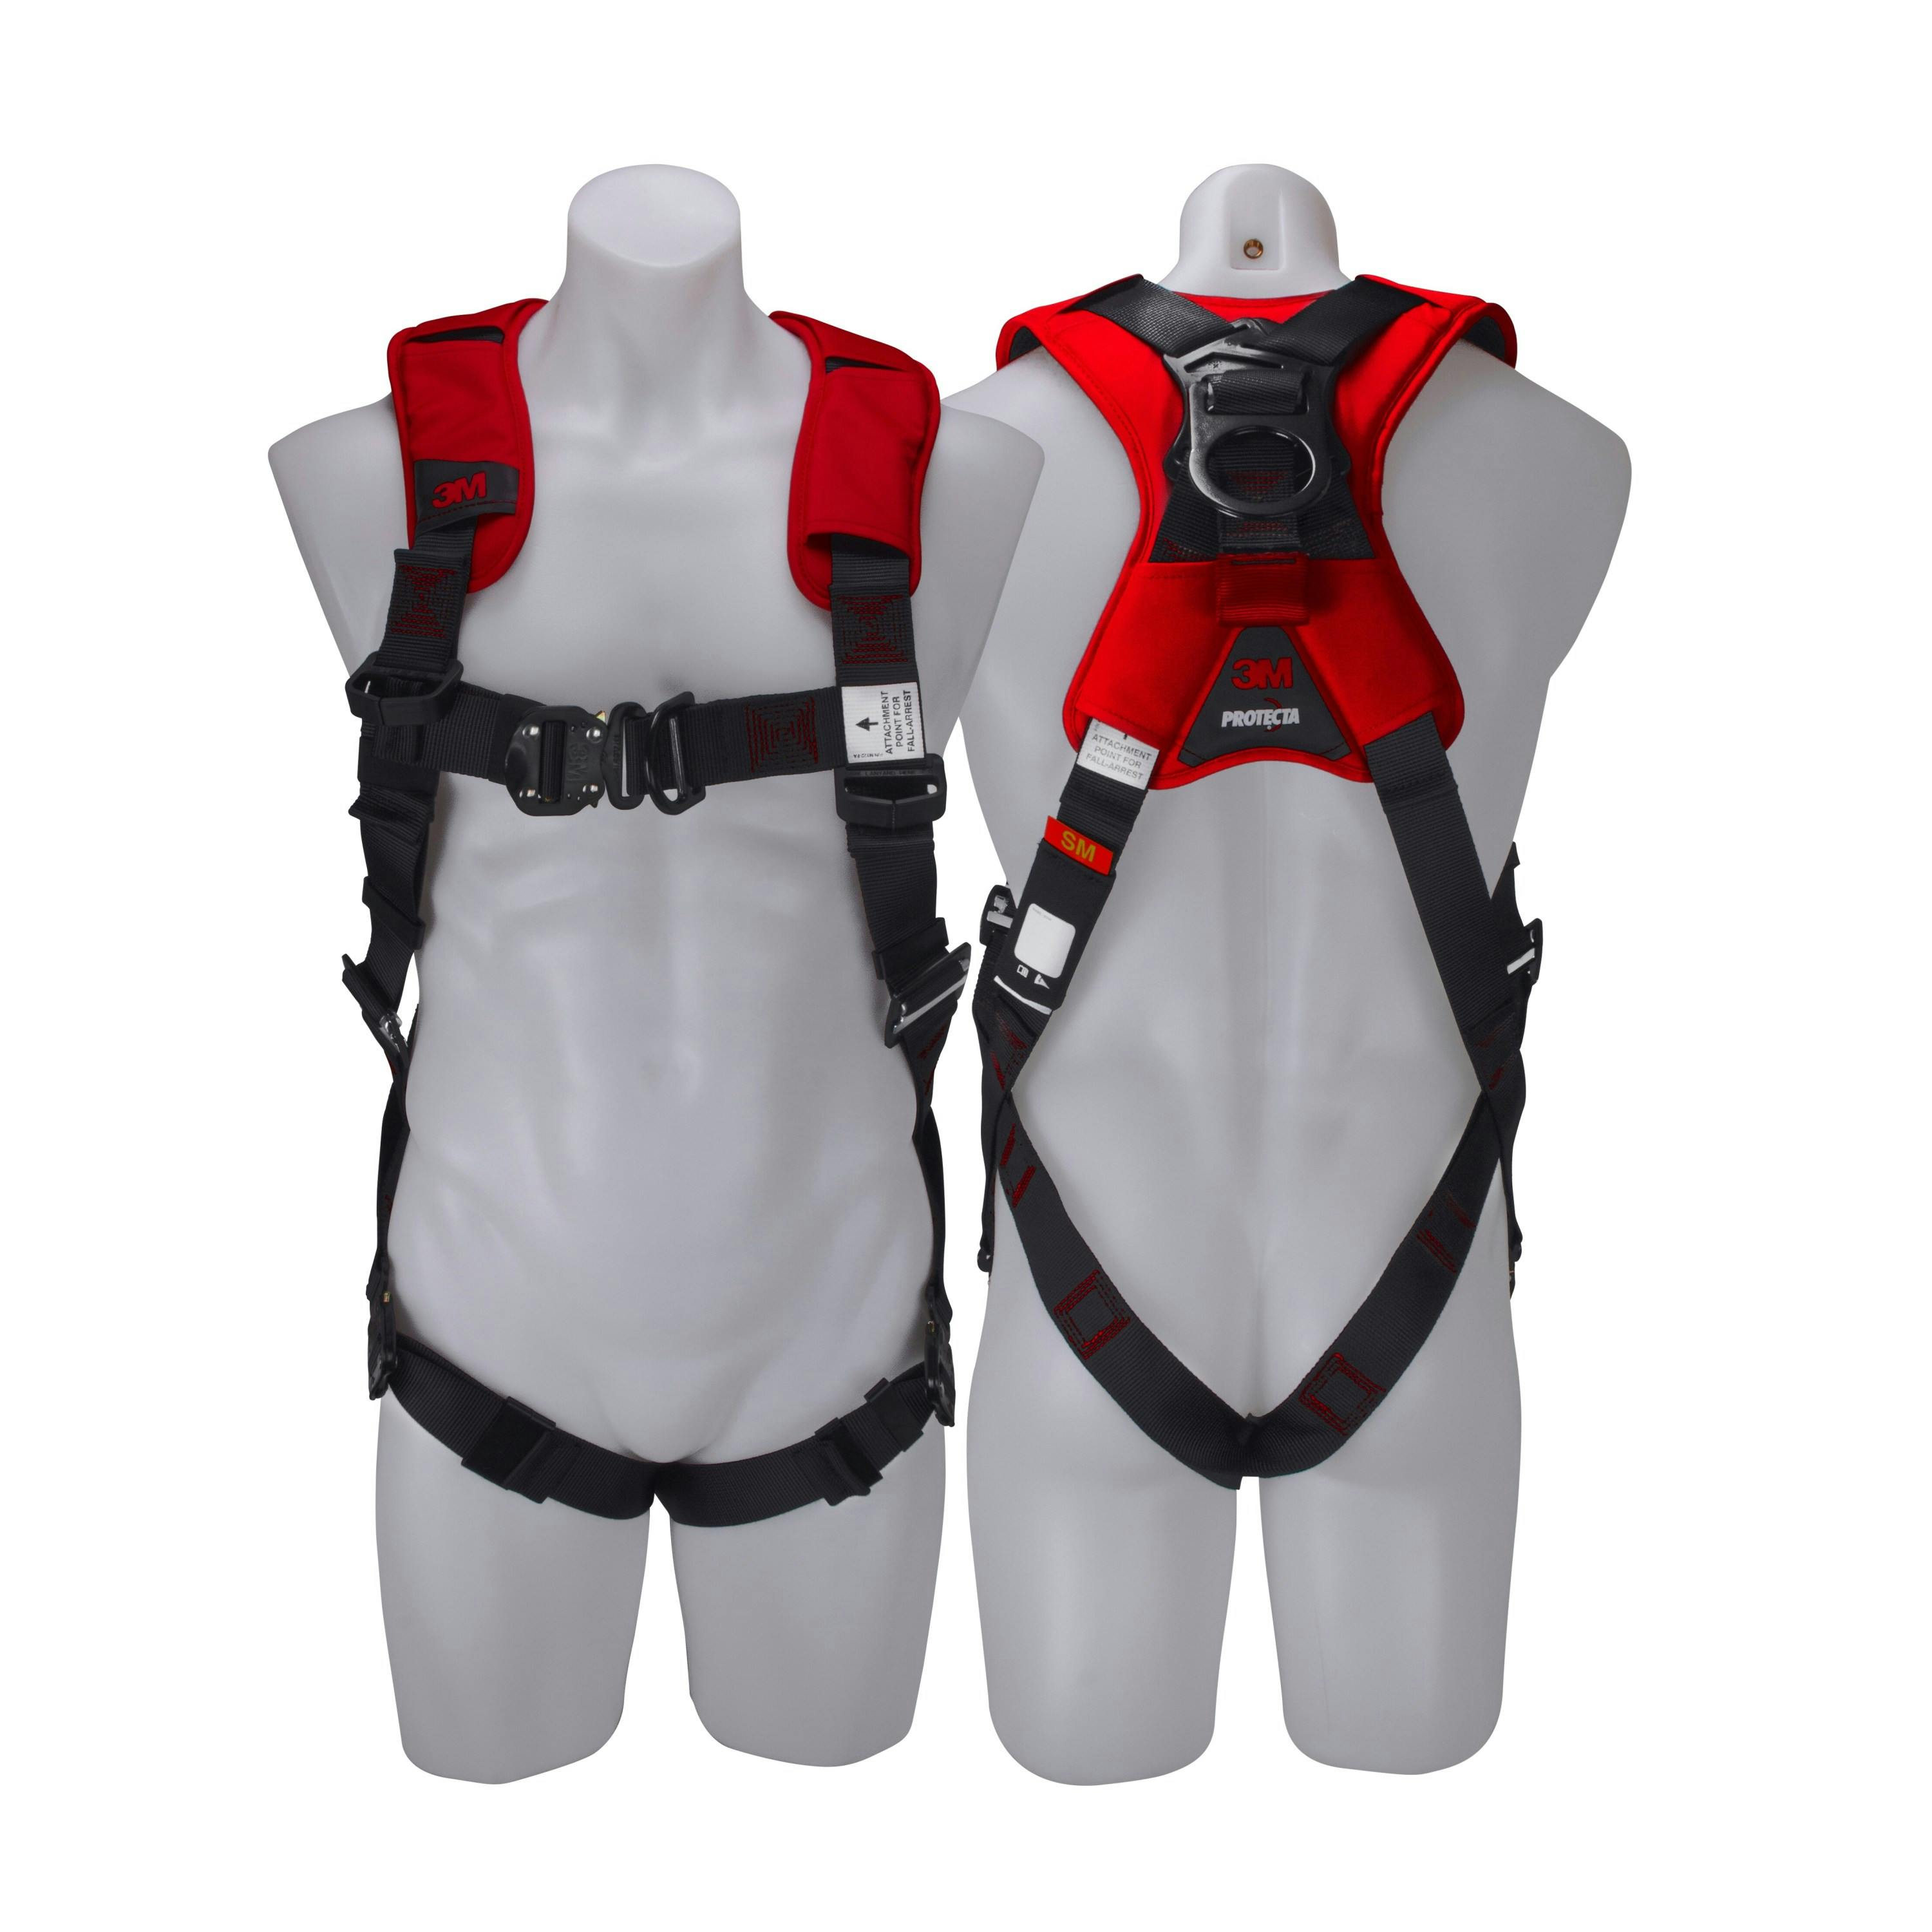 3M™ PROTECTA® X Riggers Harness with Padding 1161678, Red and Black, Large, 1 EA/Case